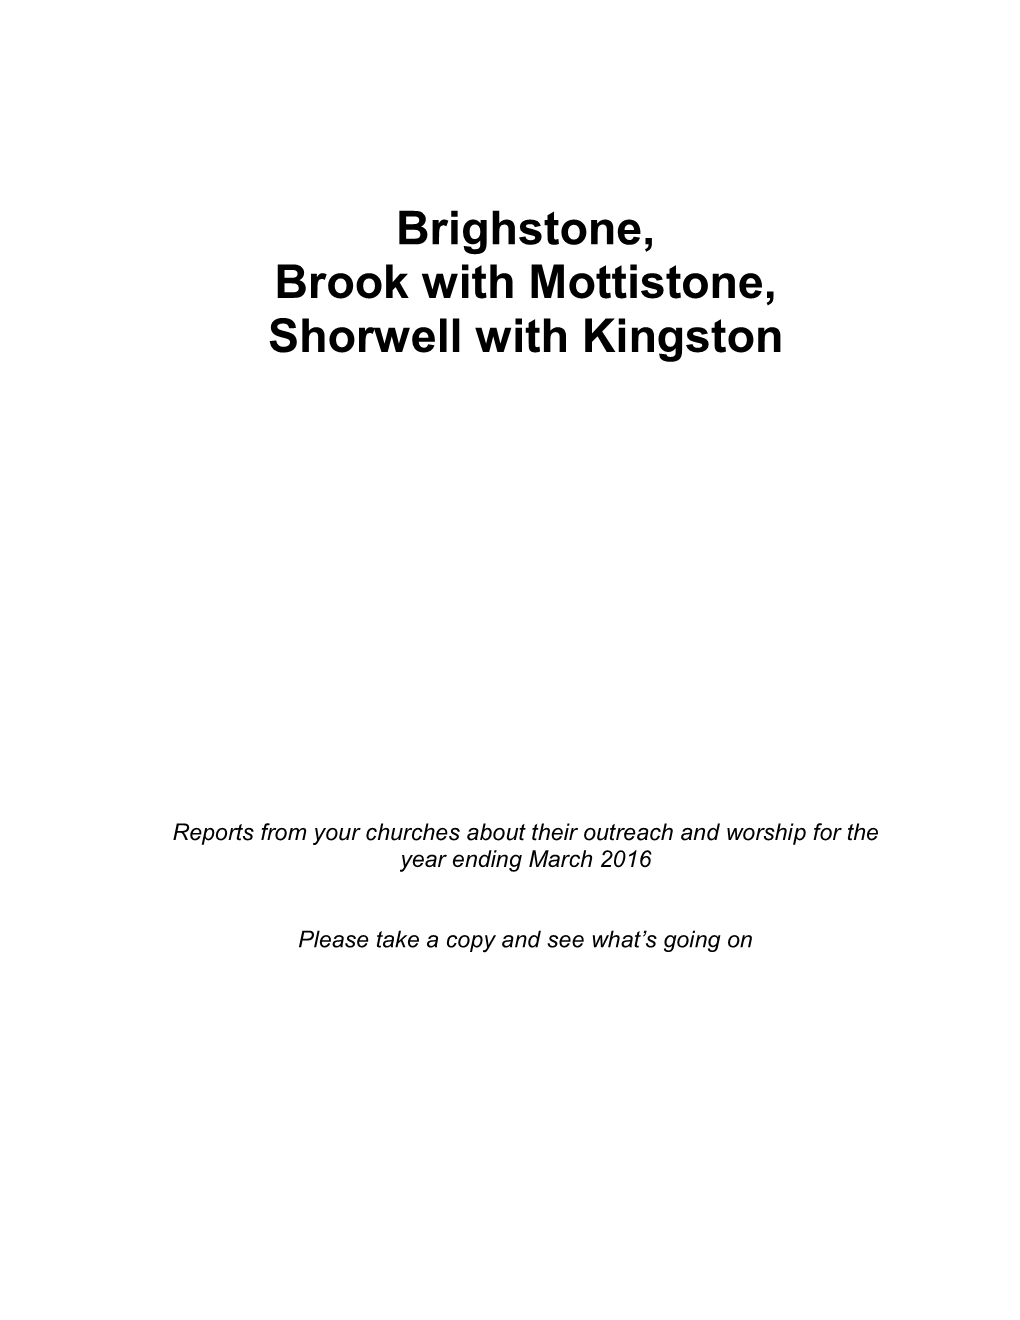 Brighstone, Brook with Mottistone, Shorwell with Kingston